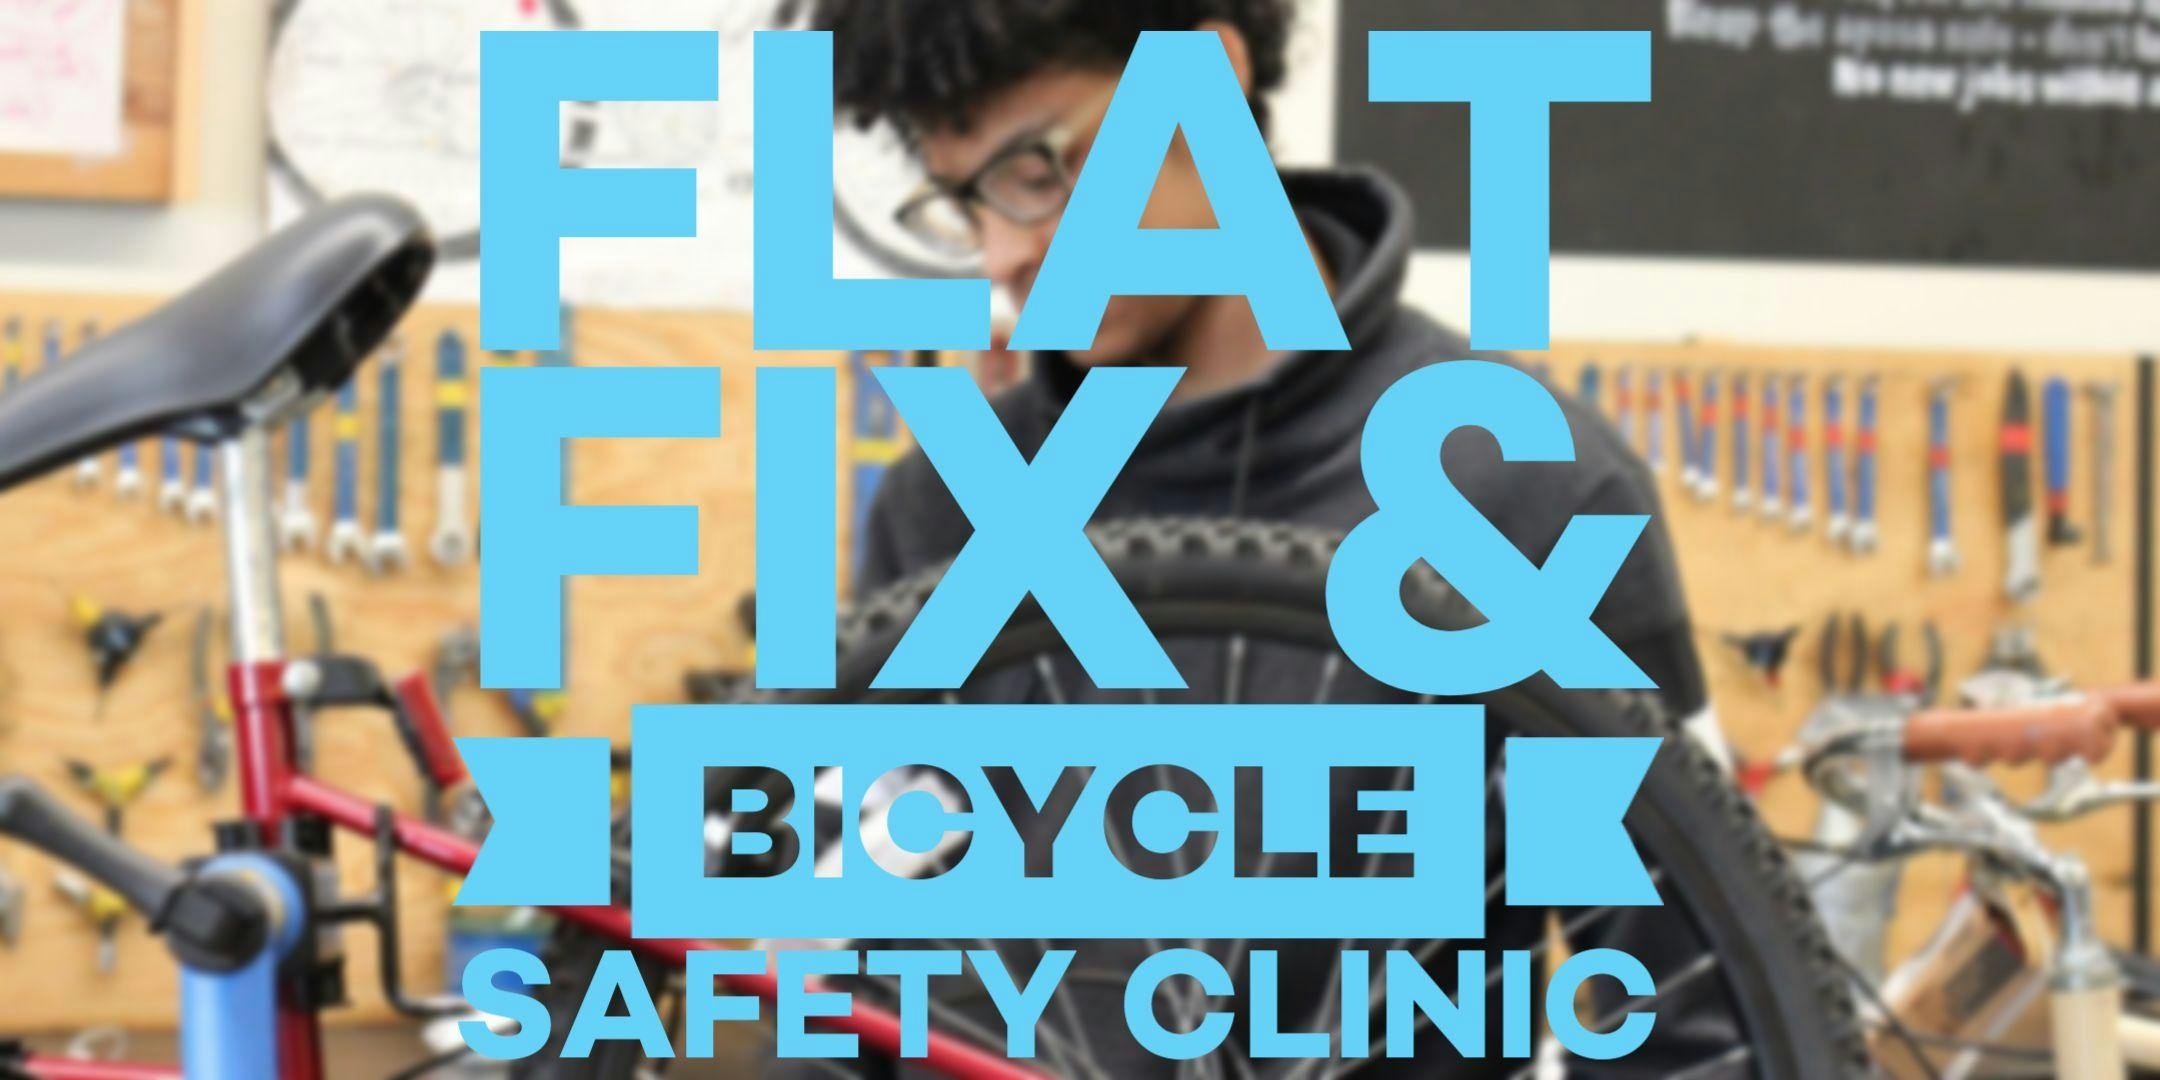 Flat Fix and Bicycle Safety Clinic